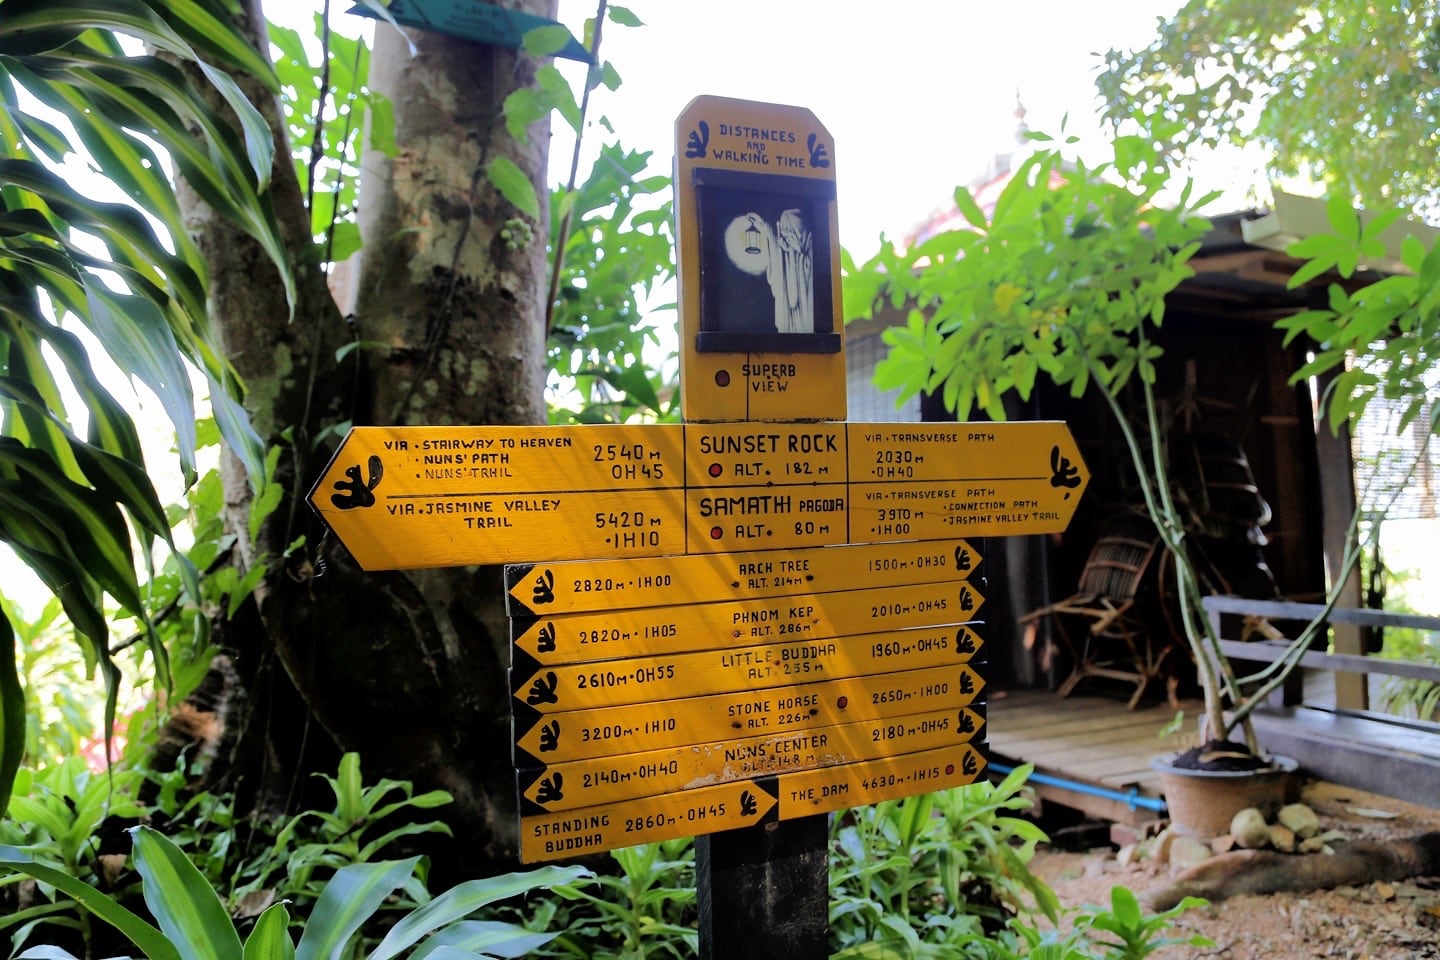 Led Zep Cafe trail signs in Kep National Park